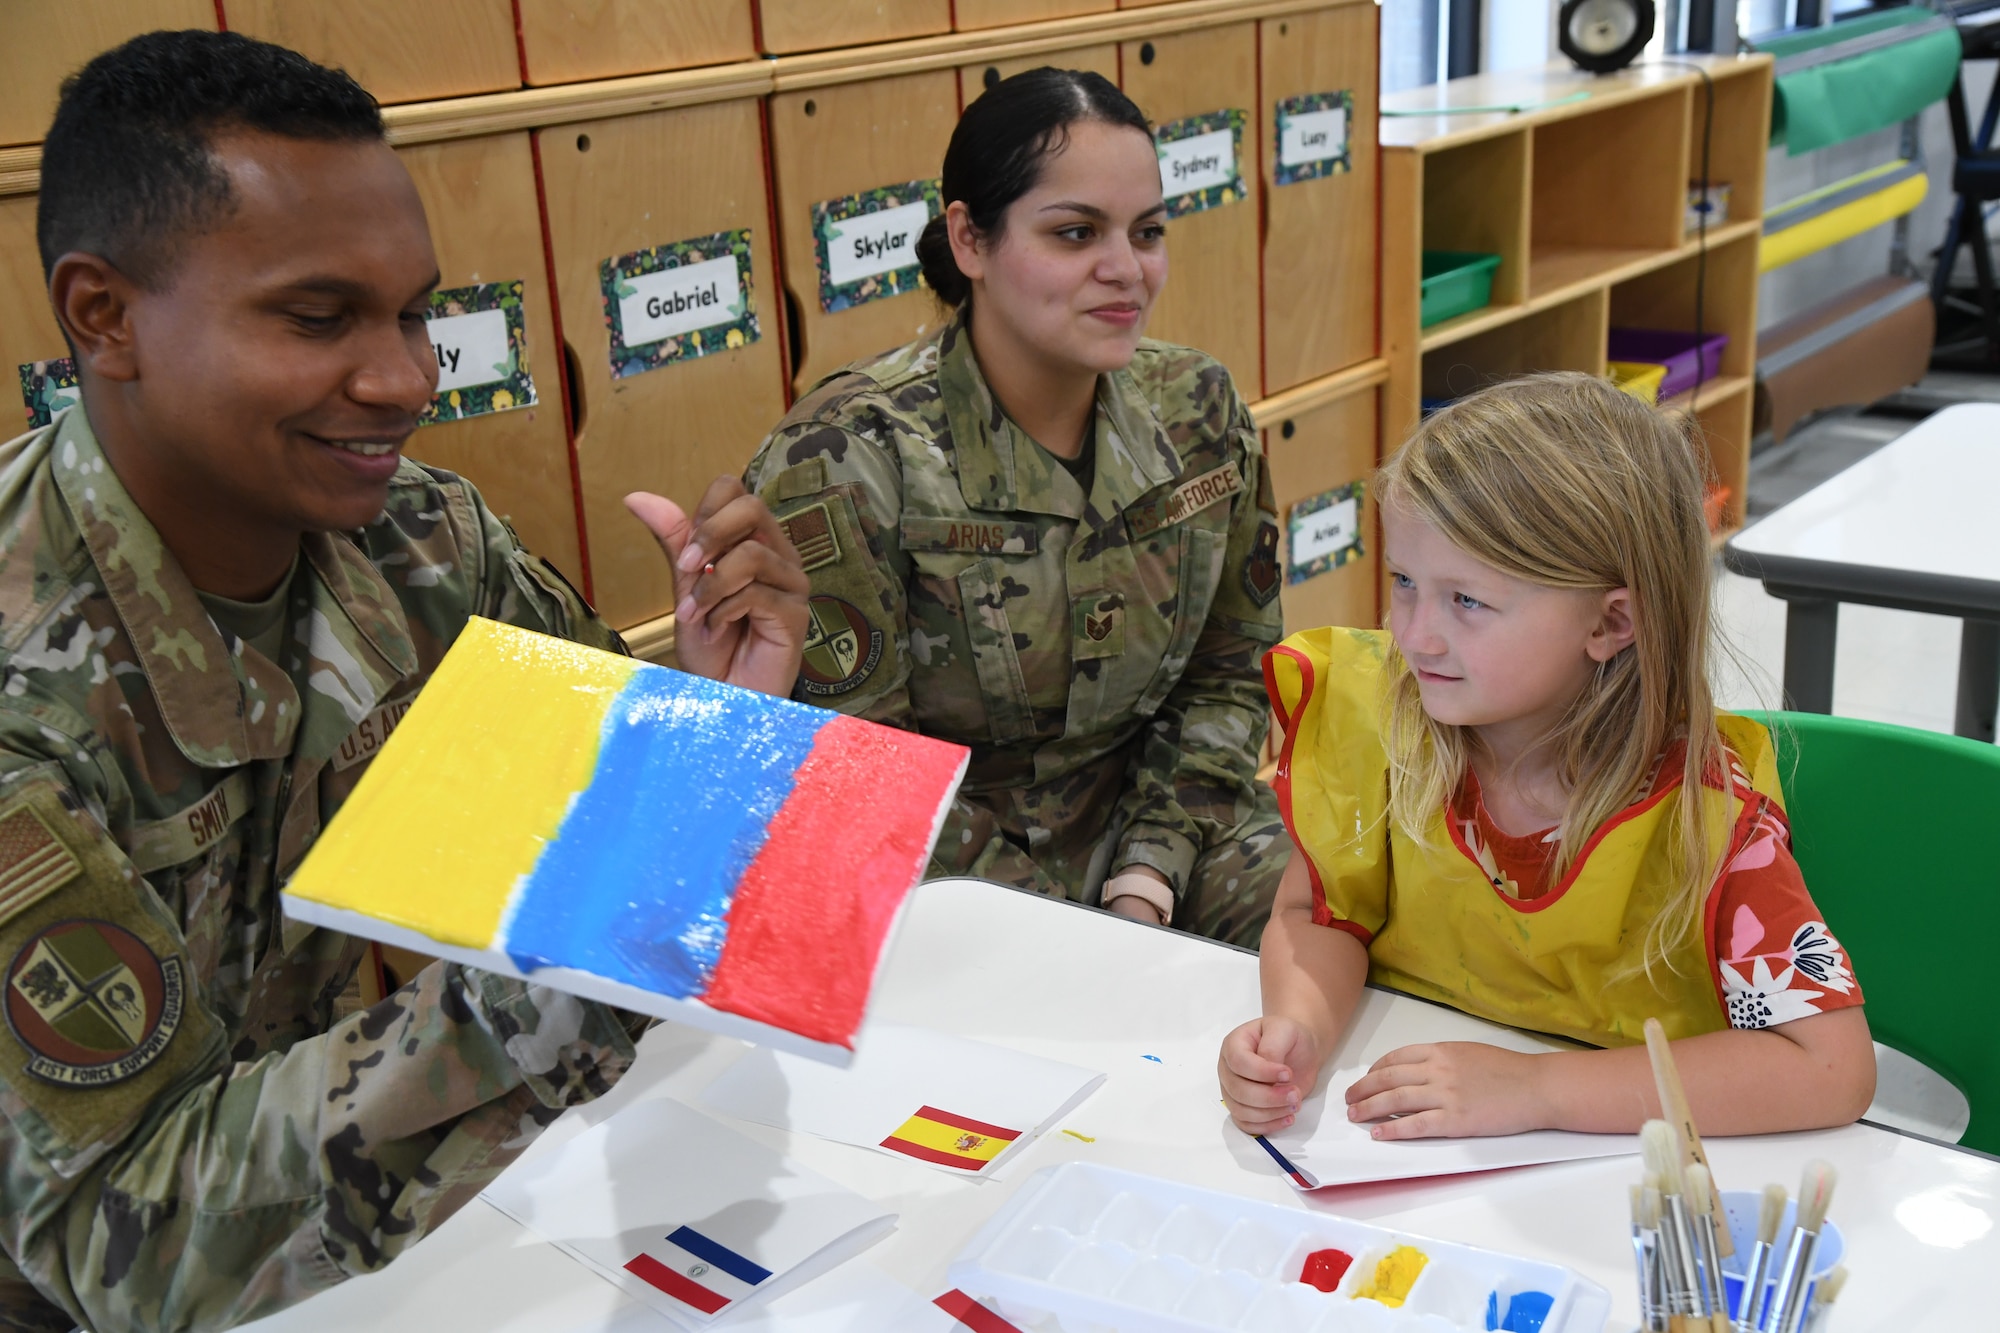 U.S. Air Force Airman 1st Class Leonard Smith, 81st Force Support Squadron retentions technician, assists Leah Cofer, daughter of Anna Russo, 81st FSS Fisher House administrative support clerk, with an art project as Staff Sgt. Rebekah Arias, 81st FSS manpower analyst, looks on inside the youth center at Keesler Air Force Base, Mississippi, Oct. 7, 2022. The event was held in celebration of Hispanic Heritage Month, which is celebrated Sept. 15 through Oct. 15.